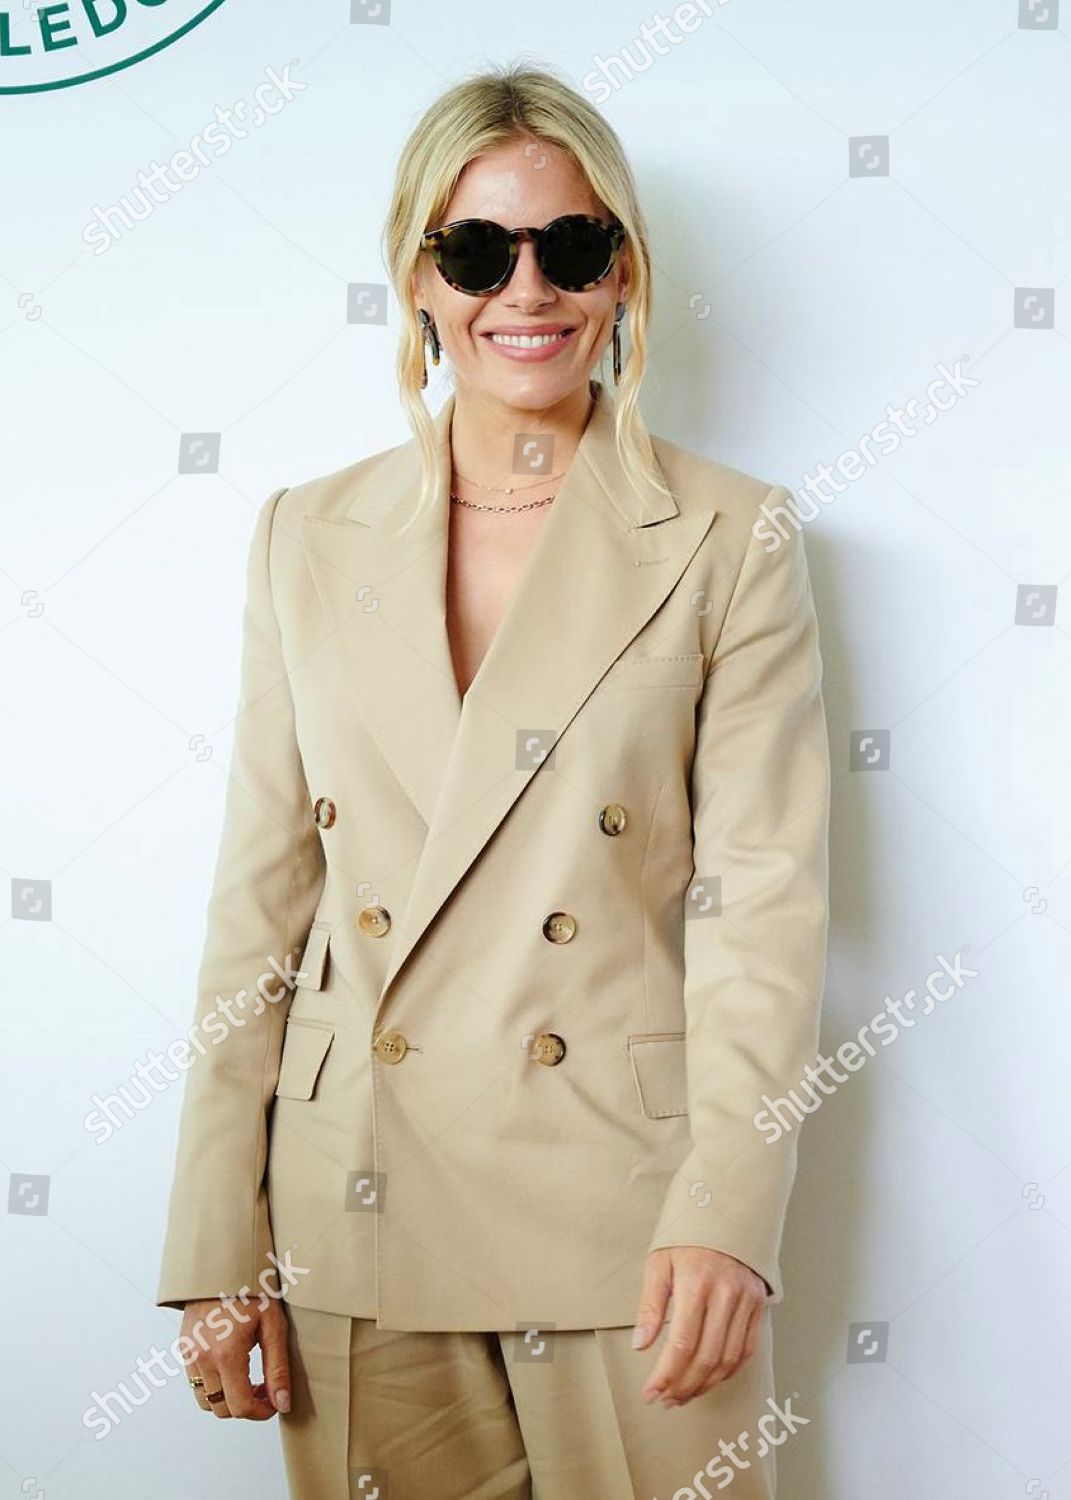 the-polo-ralph-lauren-suite-wimbledon-tennis-championships-day-7-the-all-england-lawn-tennis-and-croquet-club-london-uk-shutterstock-editorial-10330204ai.jpg